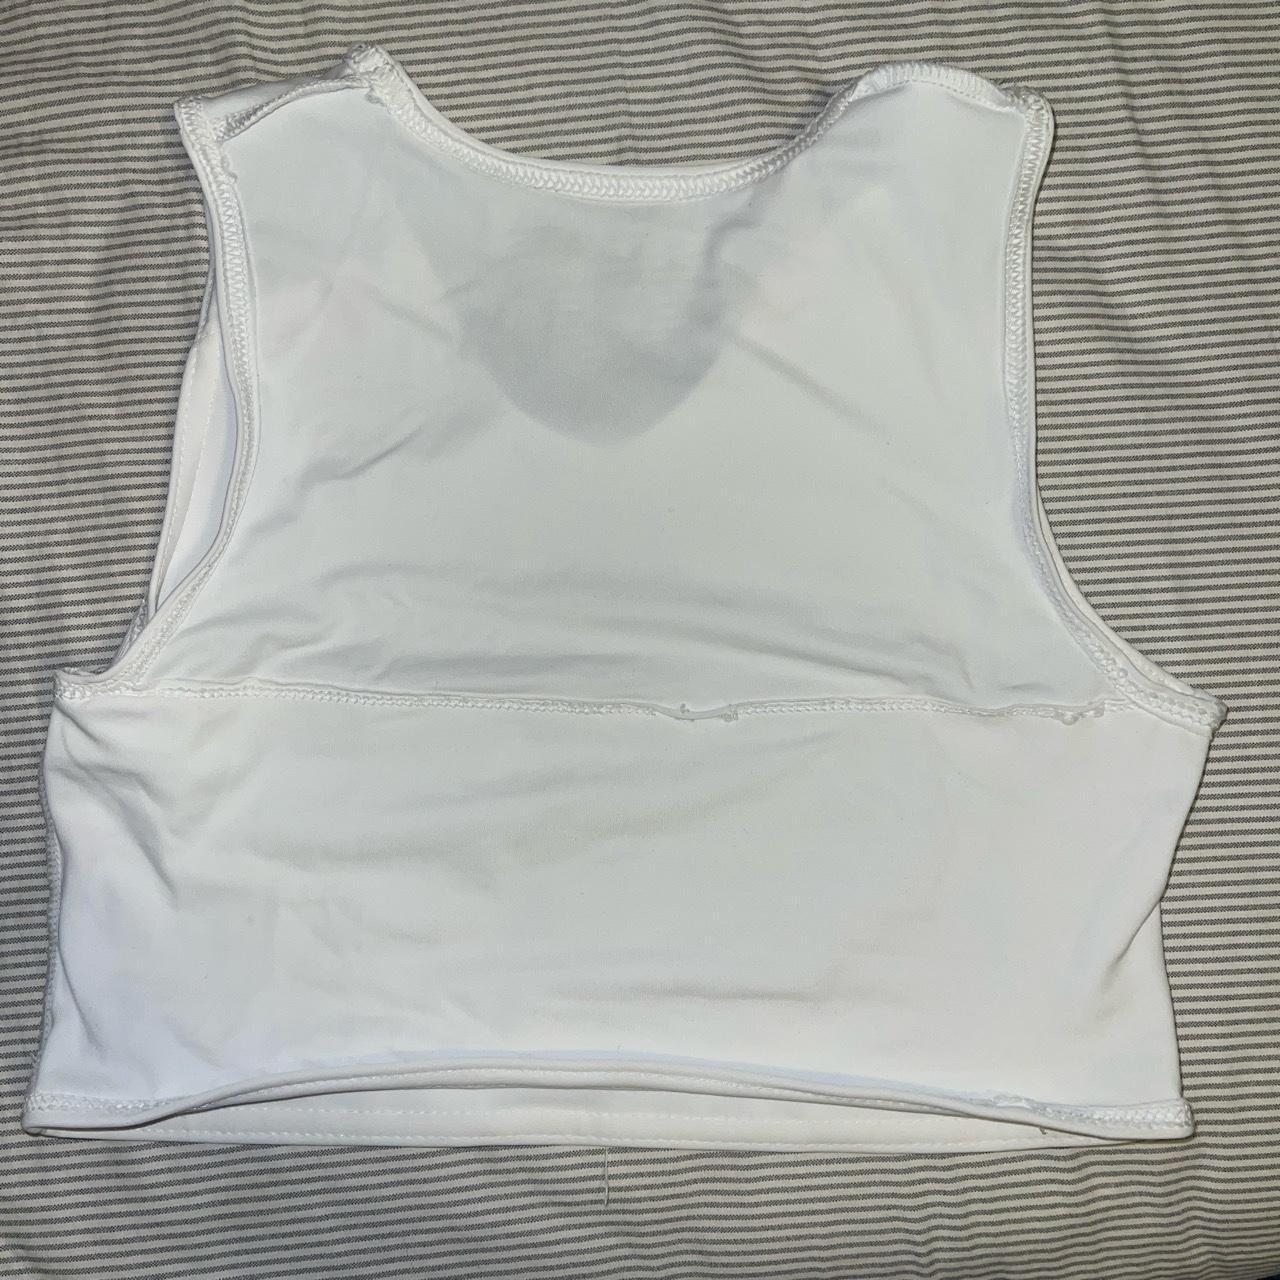 Gc2b chest binder size medium worn once to try on... - Depop